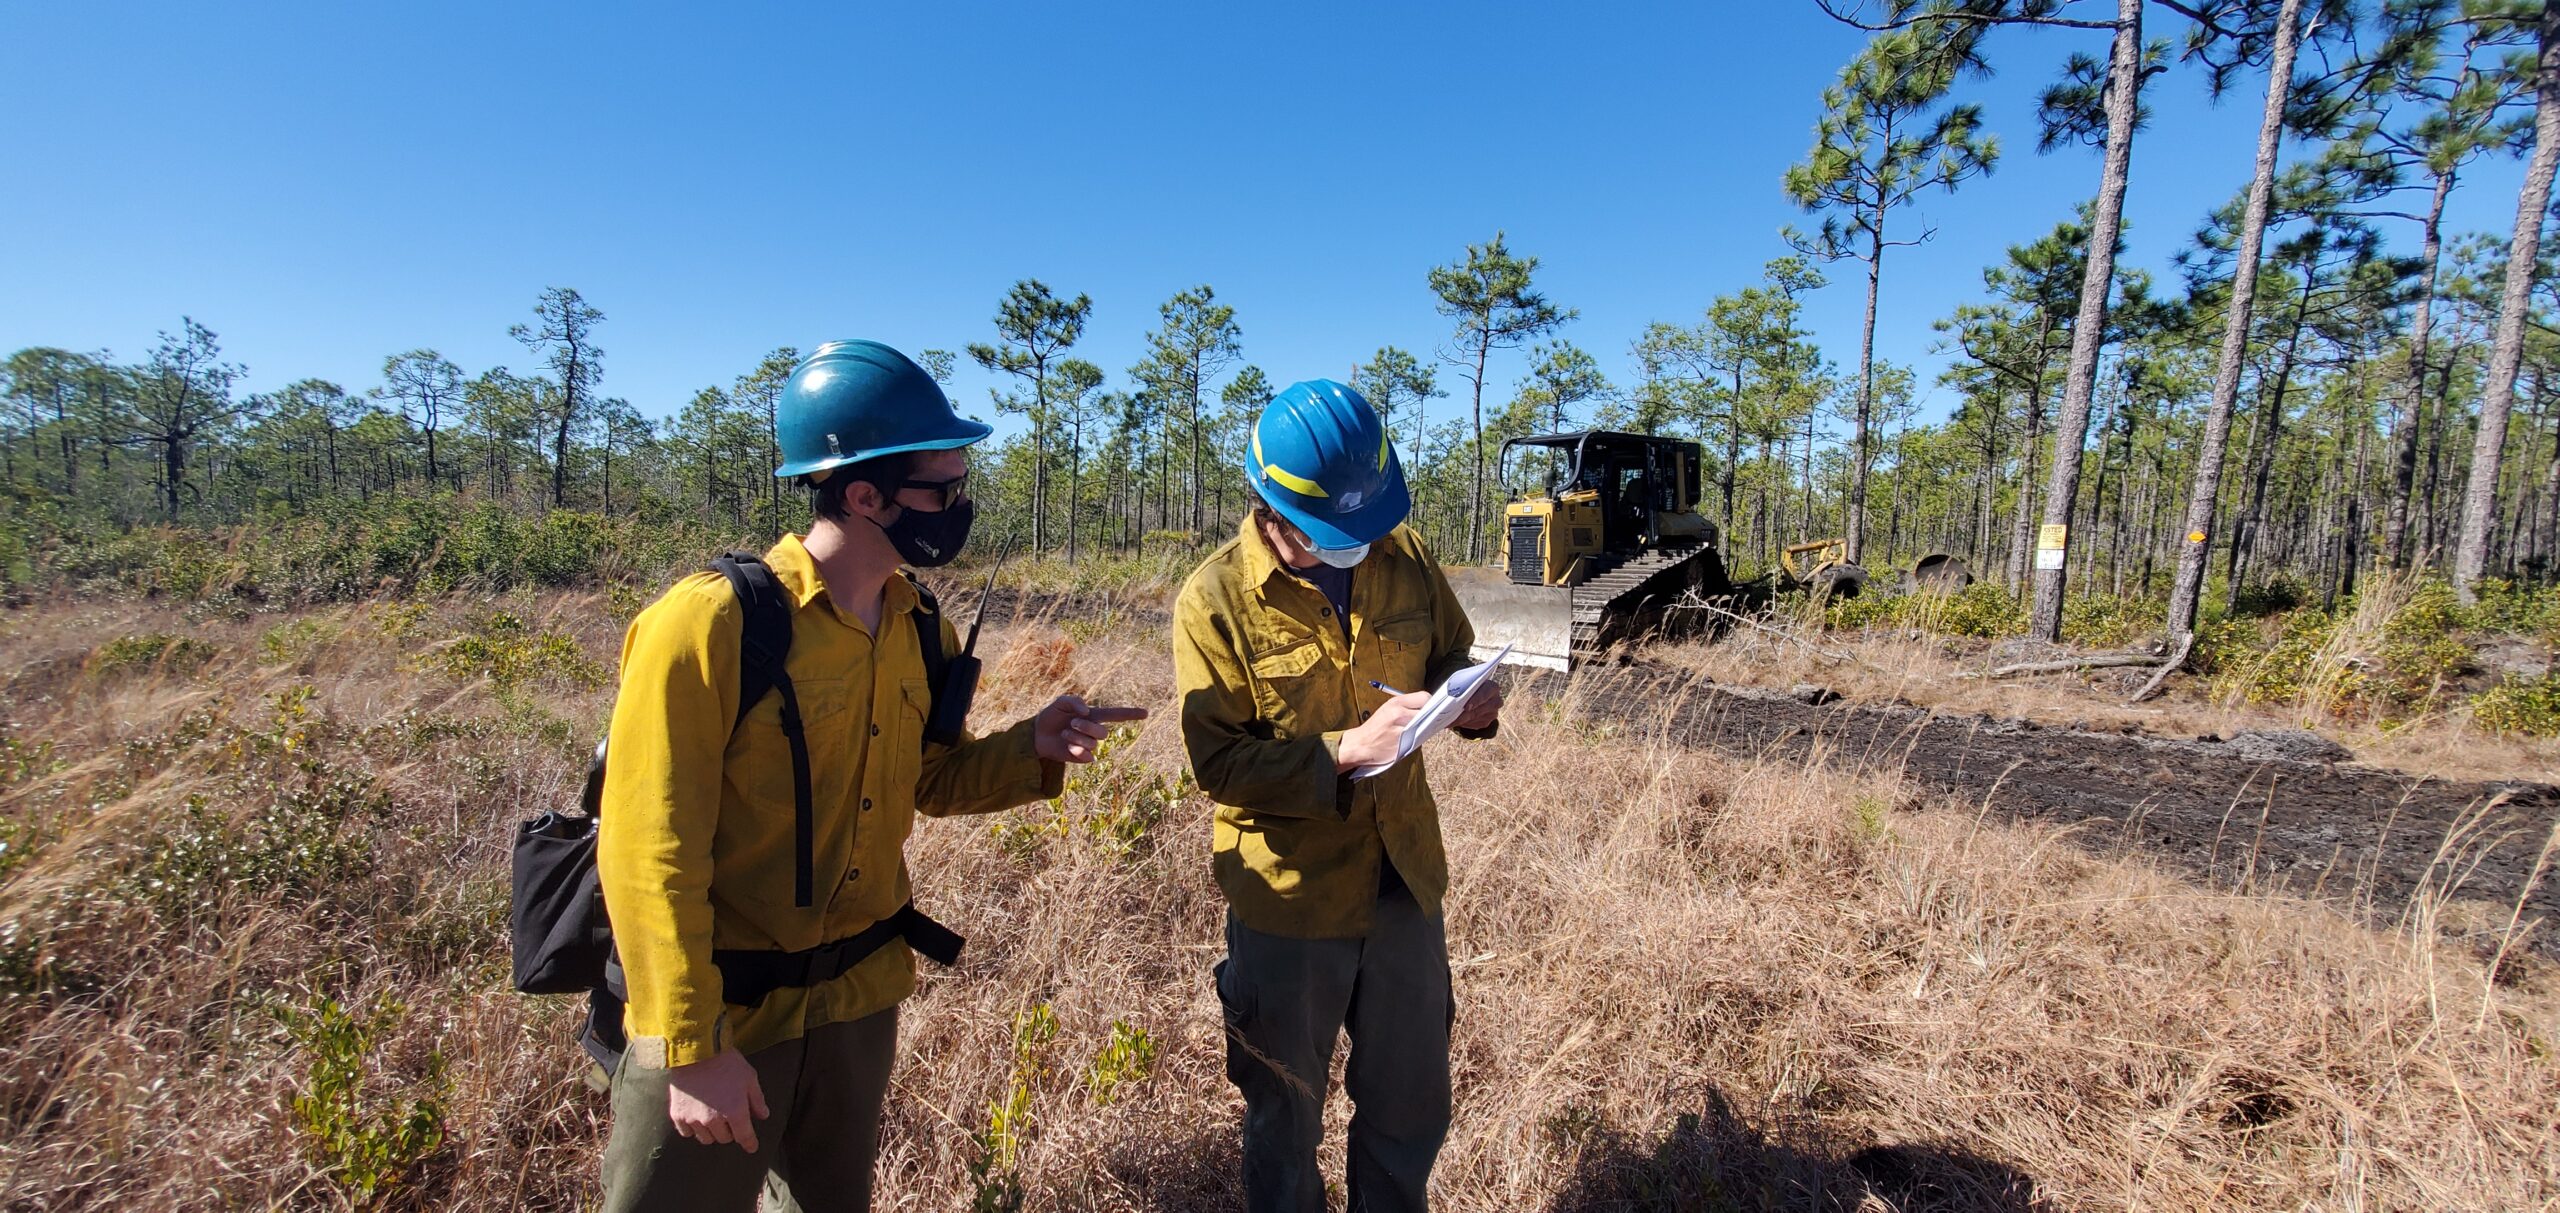 Two firefighters standing in a longleaf pine forest.